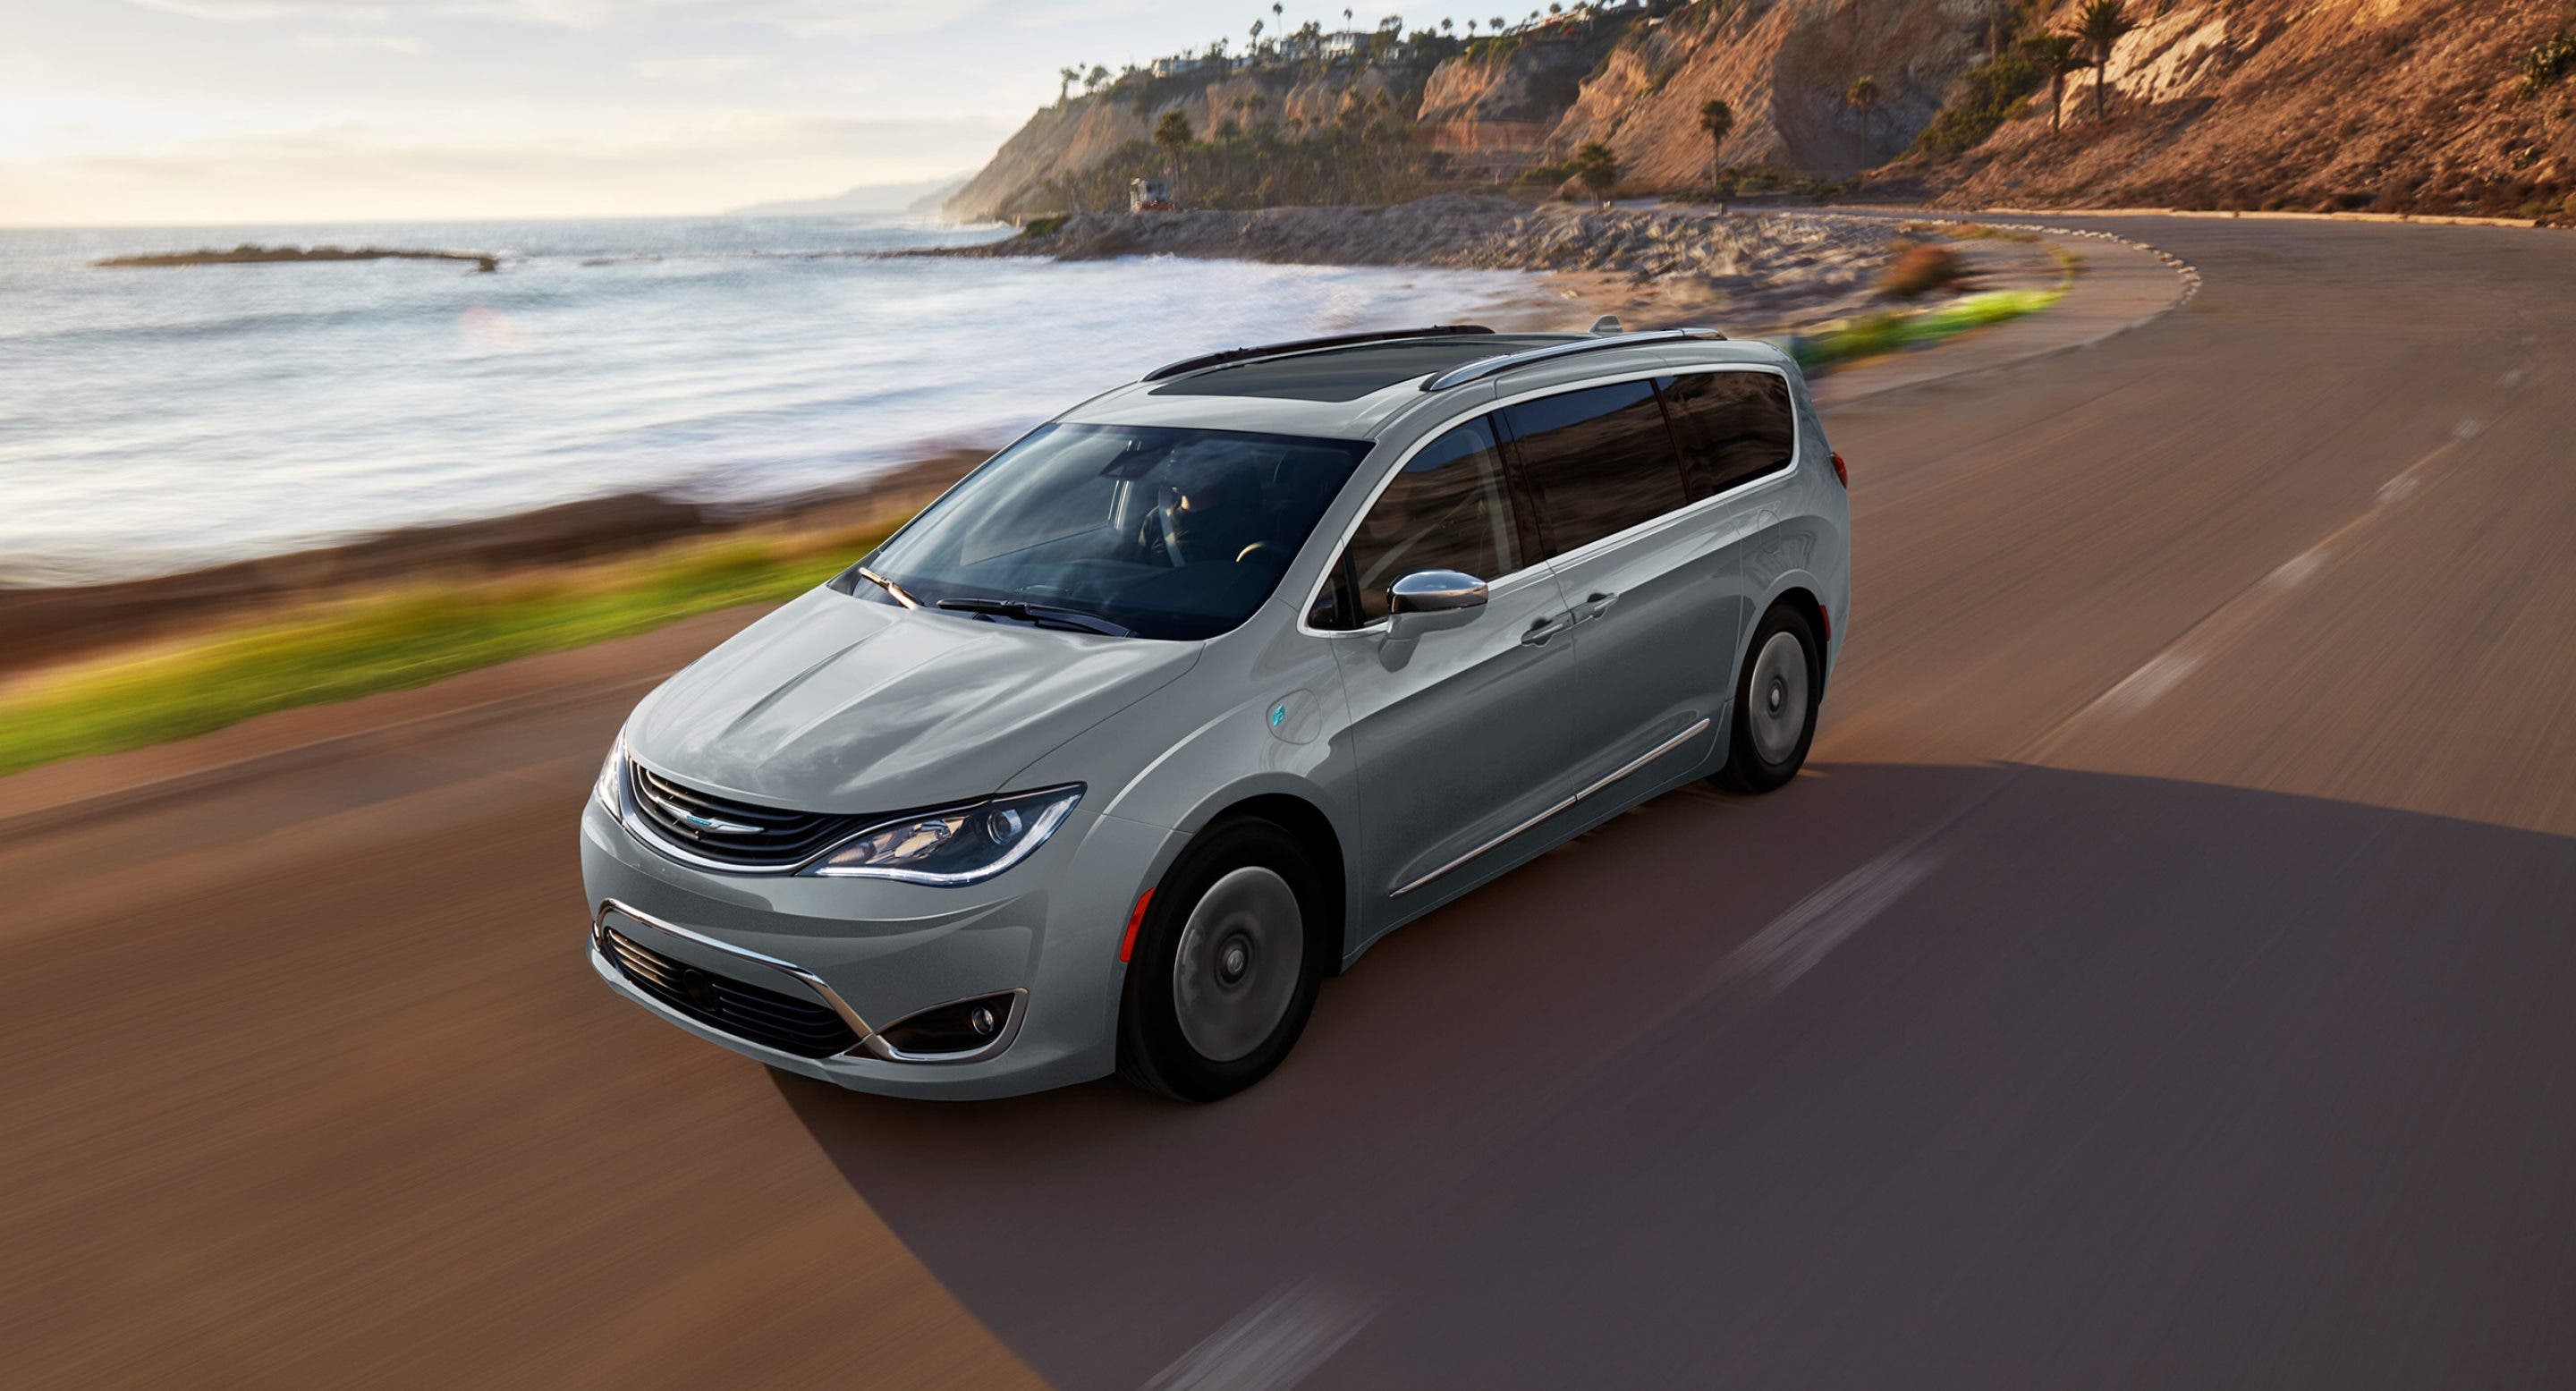 2018 Chrysler Pacifica Plug-In Hybrid Review (Exclusive)